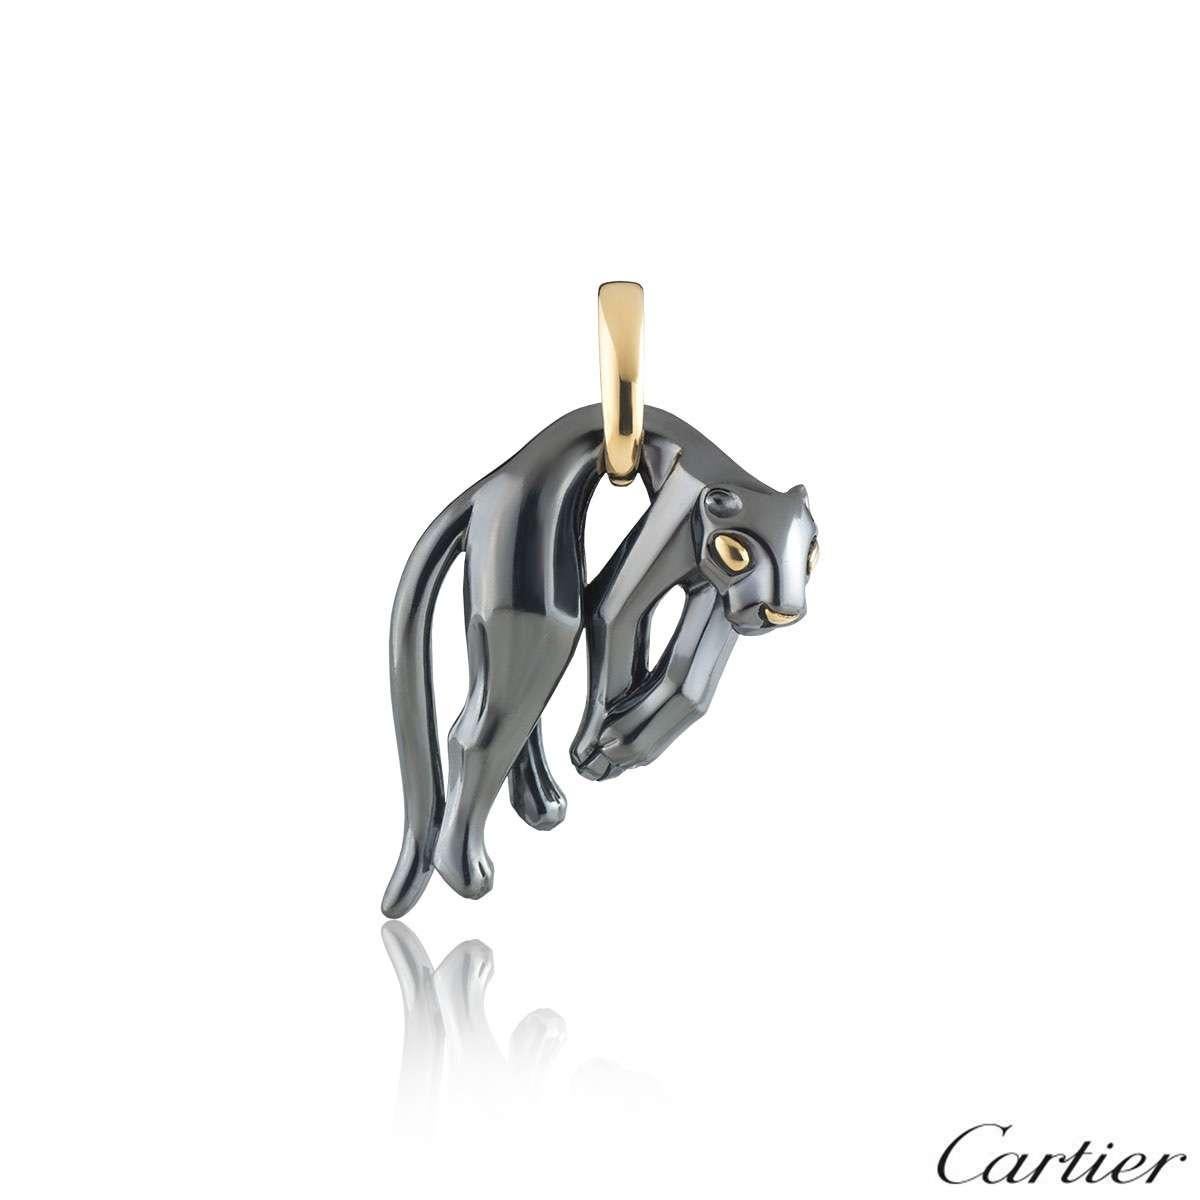 An 18k yellow gold and silverium pendant by Cartier from the Panthere De Cartier collection. The pendant comprises of a silverium panther motif hanging from the waist on a yellow gold loop bail. The motif measures 4.5cm in height and 3.2cm in width